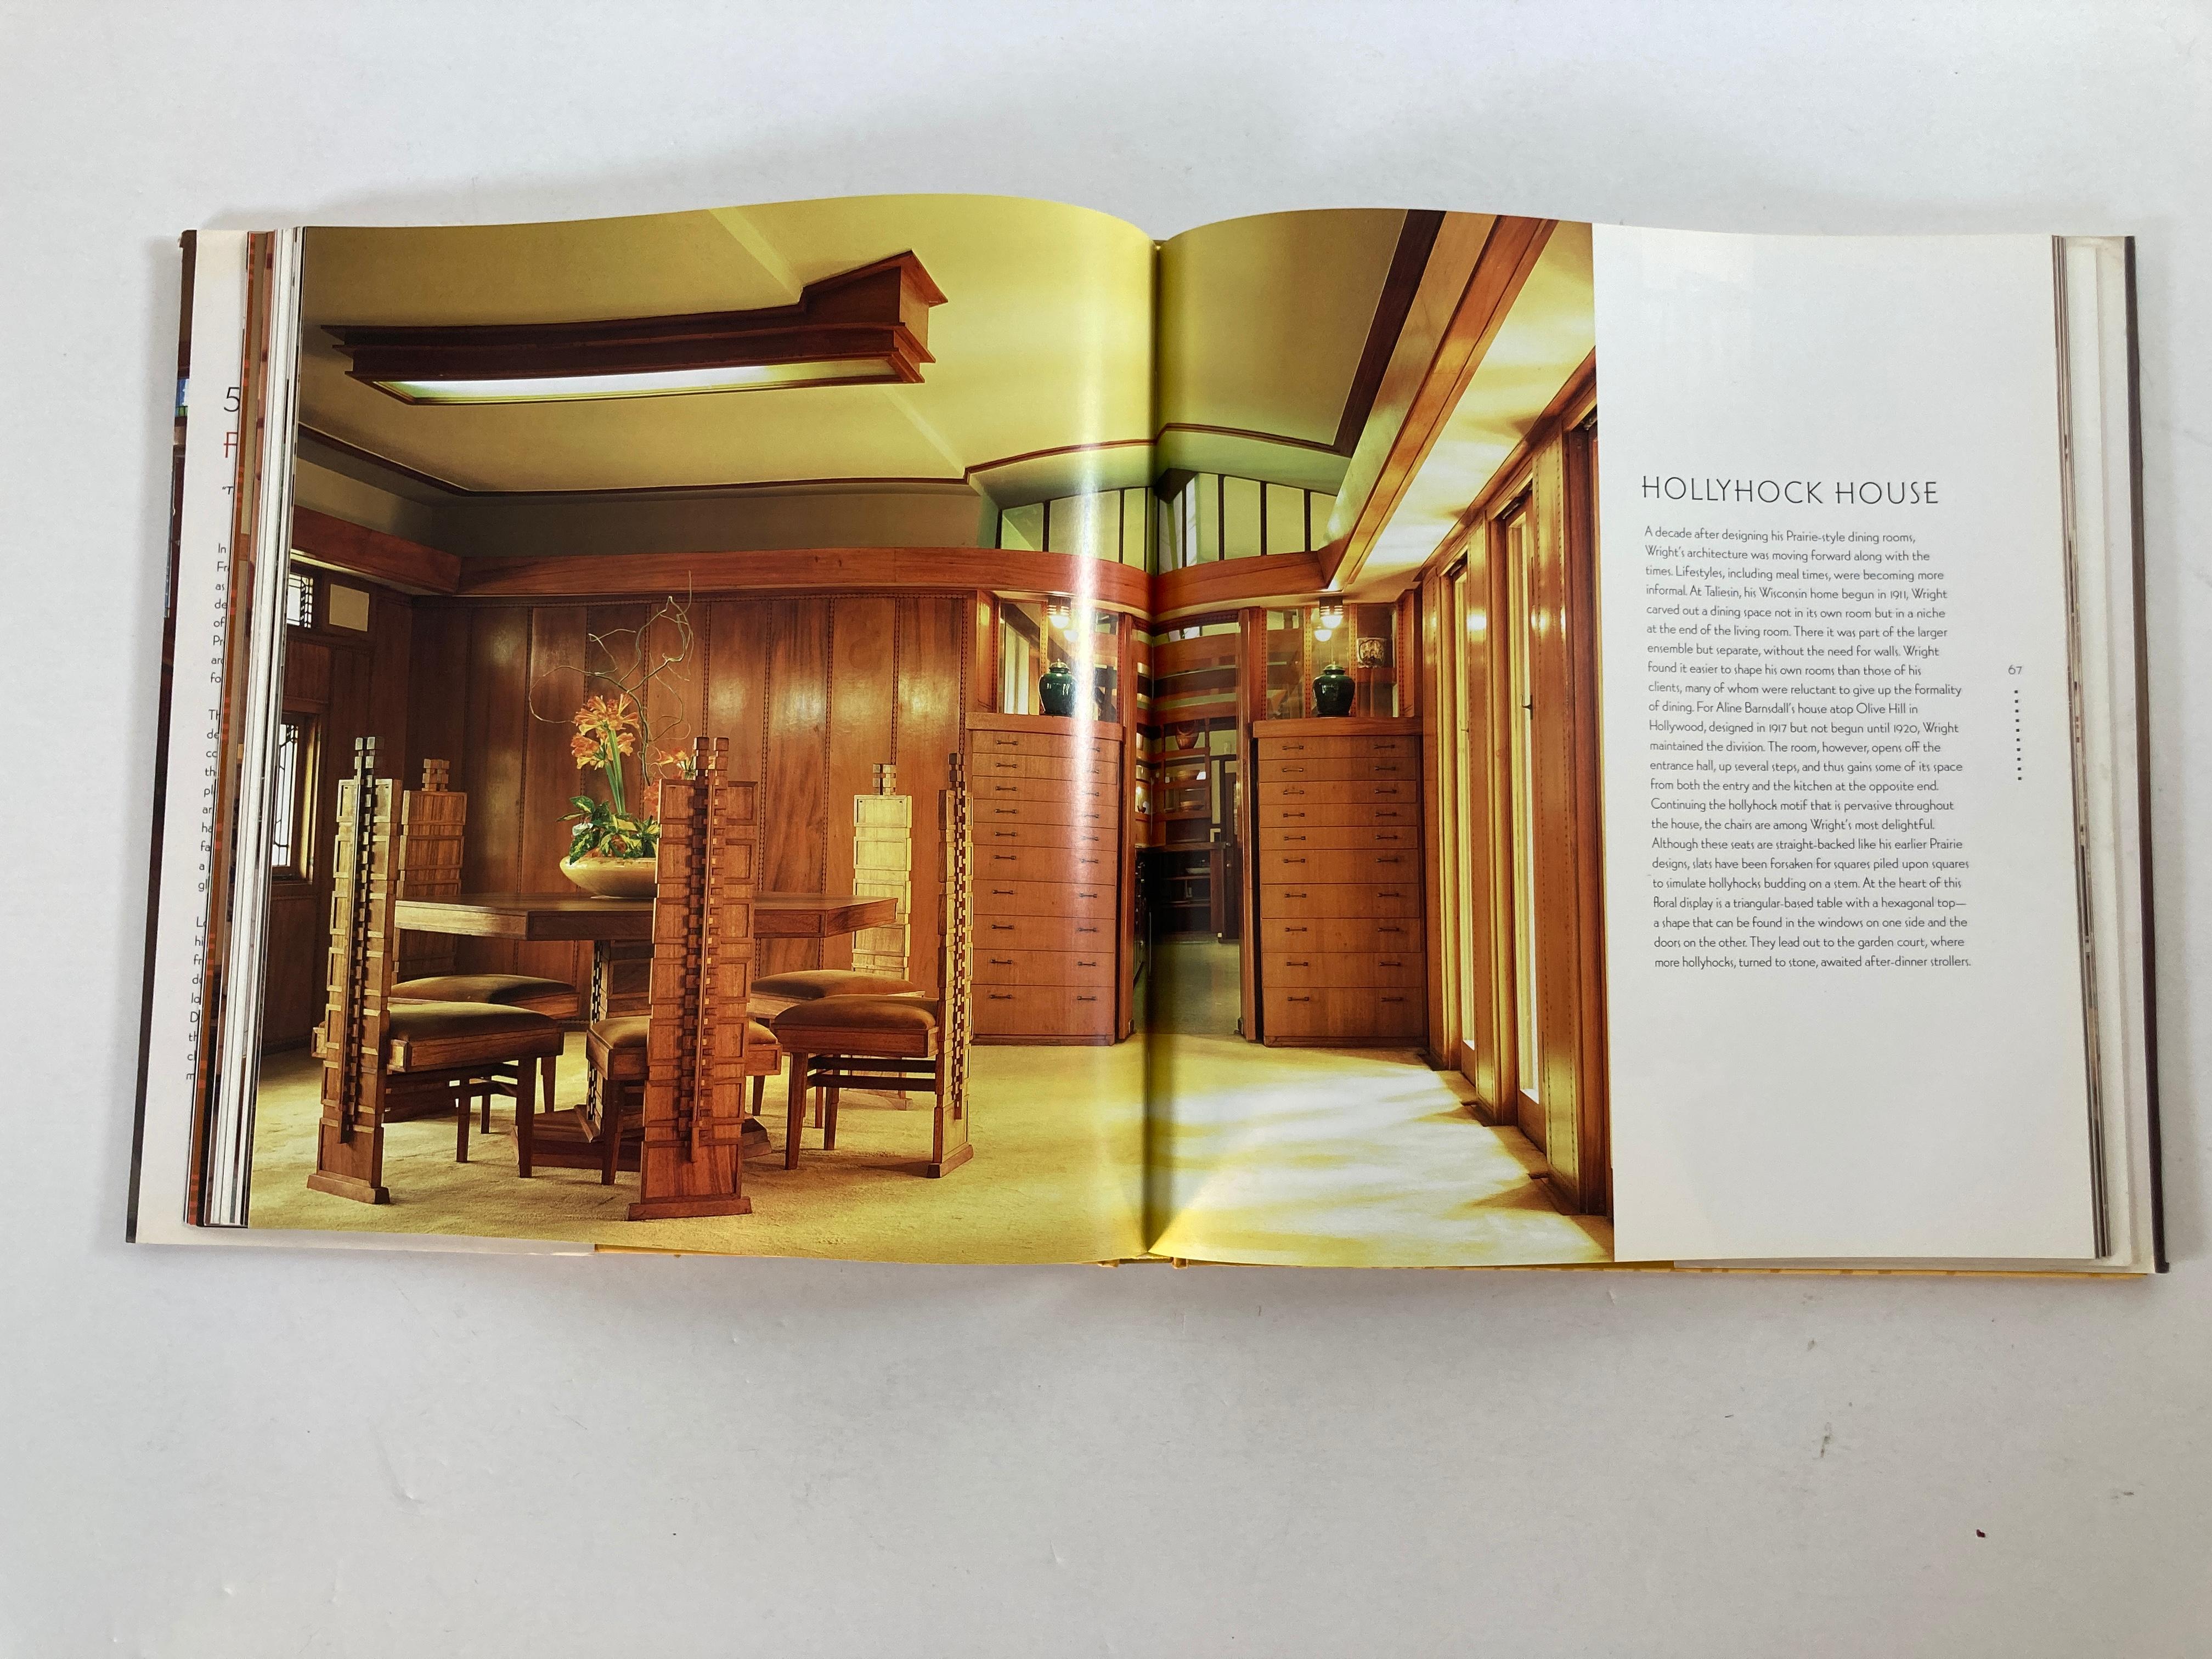 Fifty Favorite Rooms by Frank Lloyd Wright Hardcover Book 6